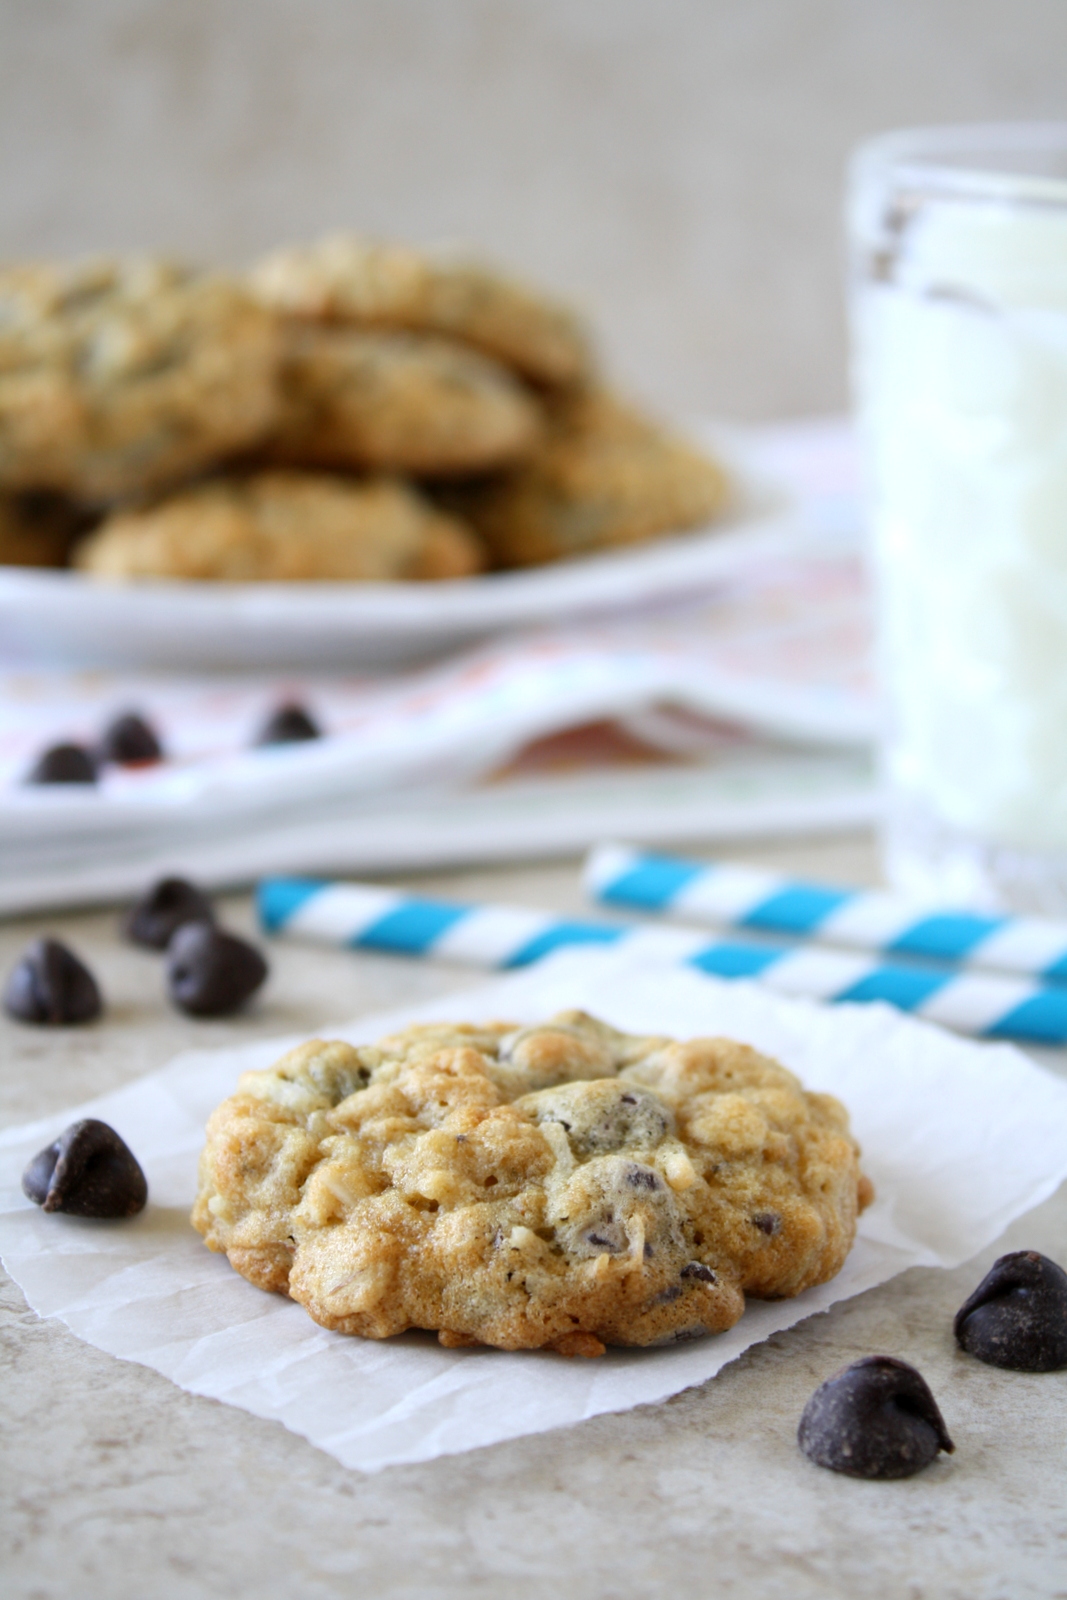 chocolate chip coconut oatmeal cookies